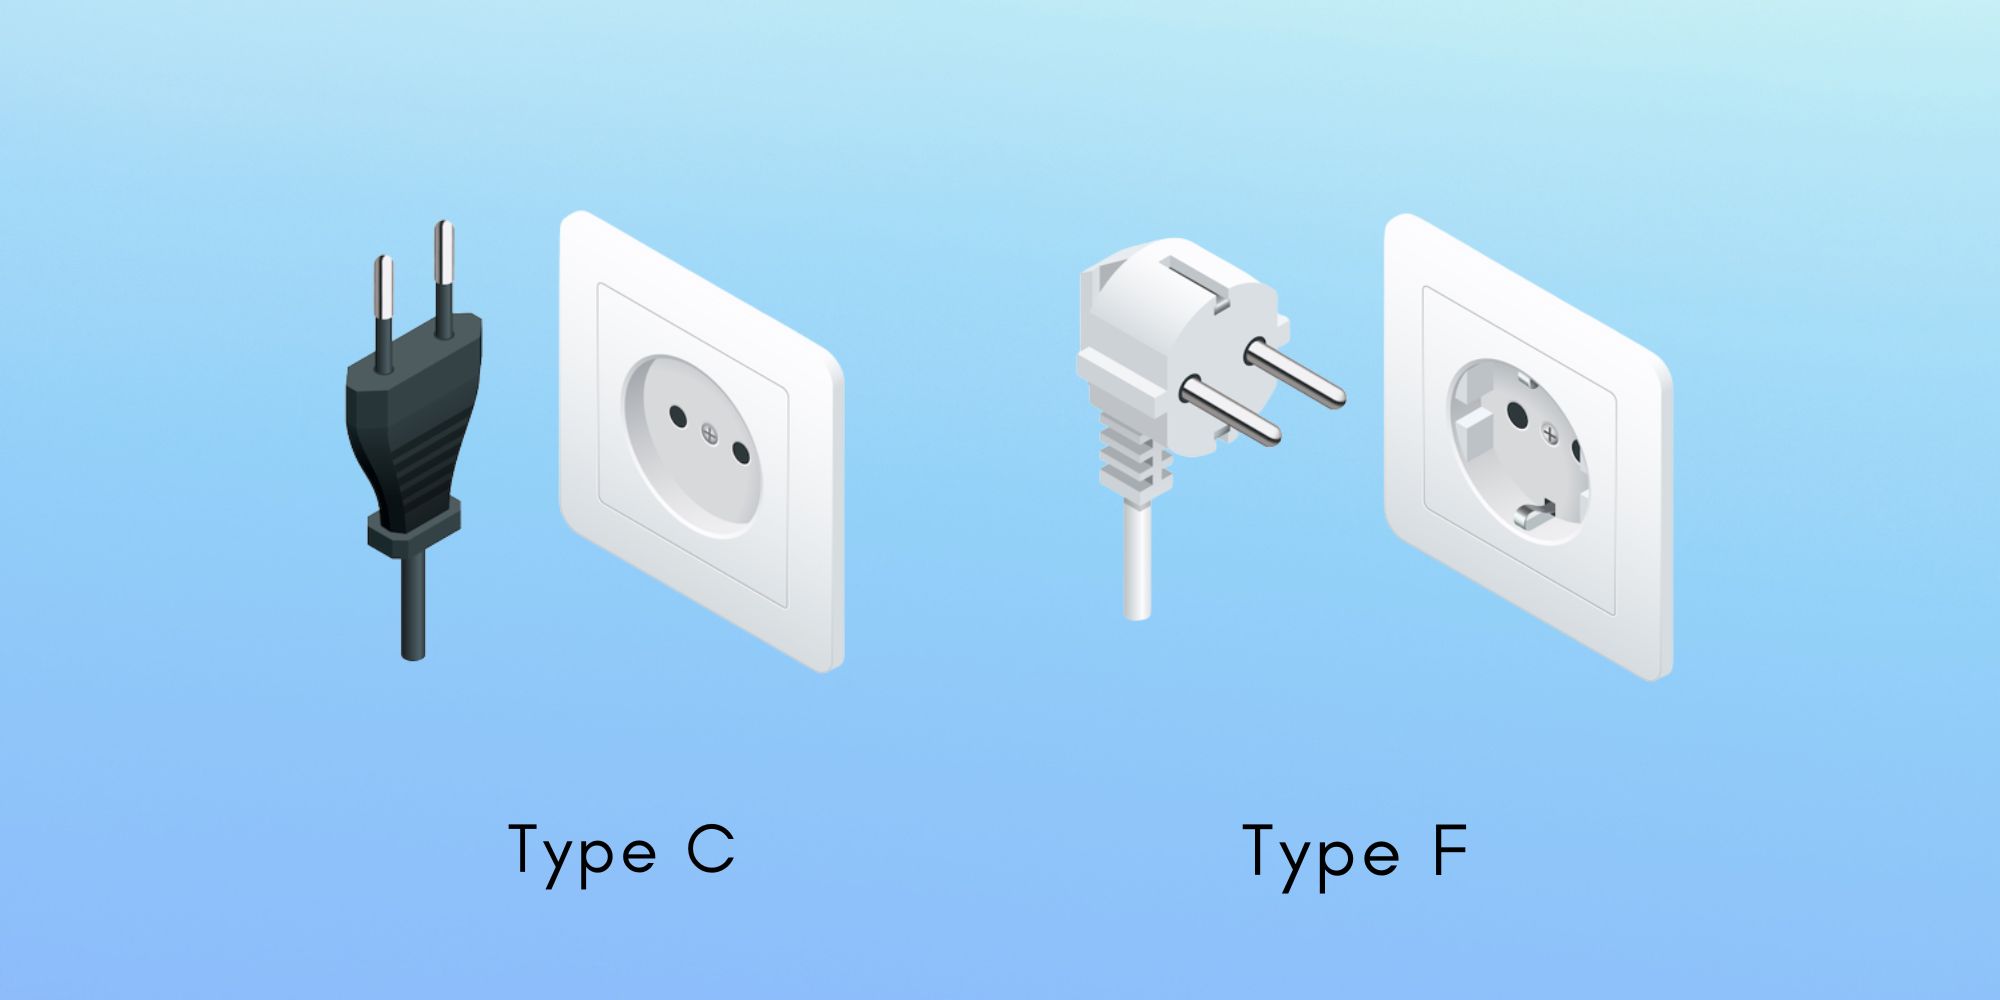 Estonia Power Plugs and Sockets: Type C and Type F
